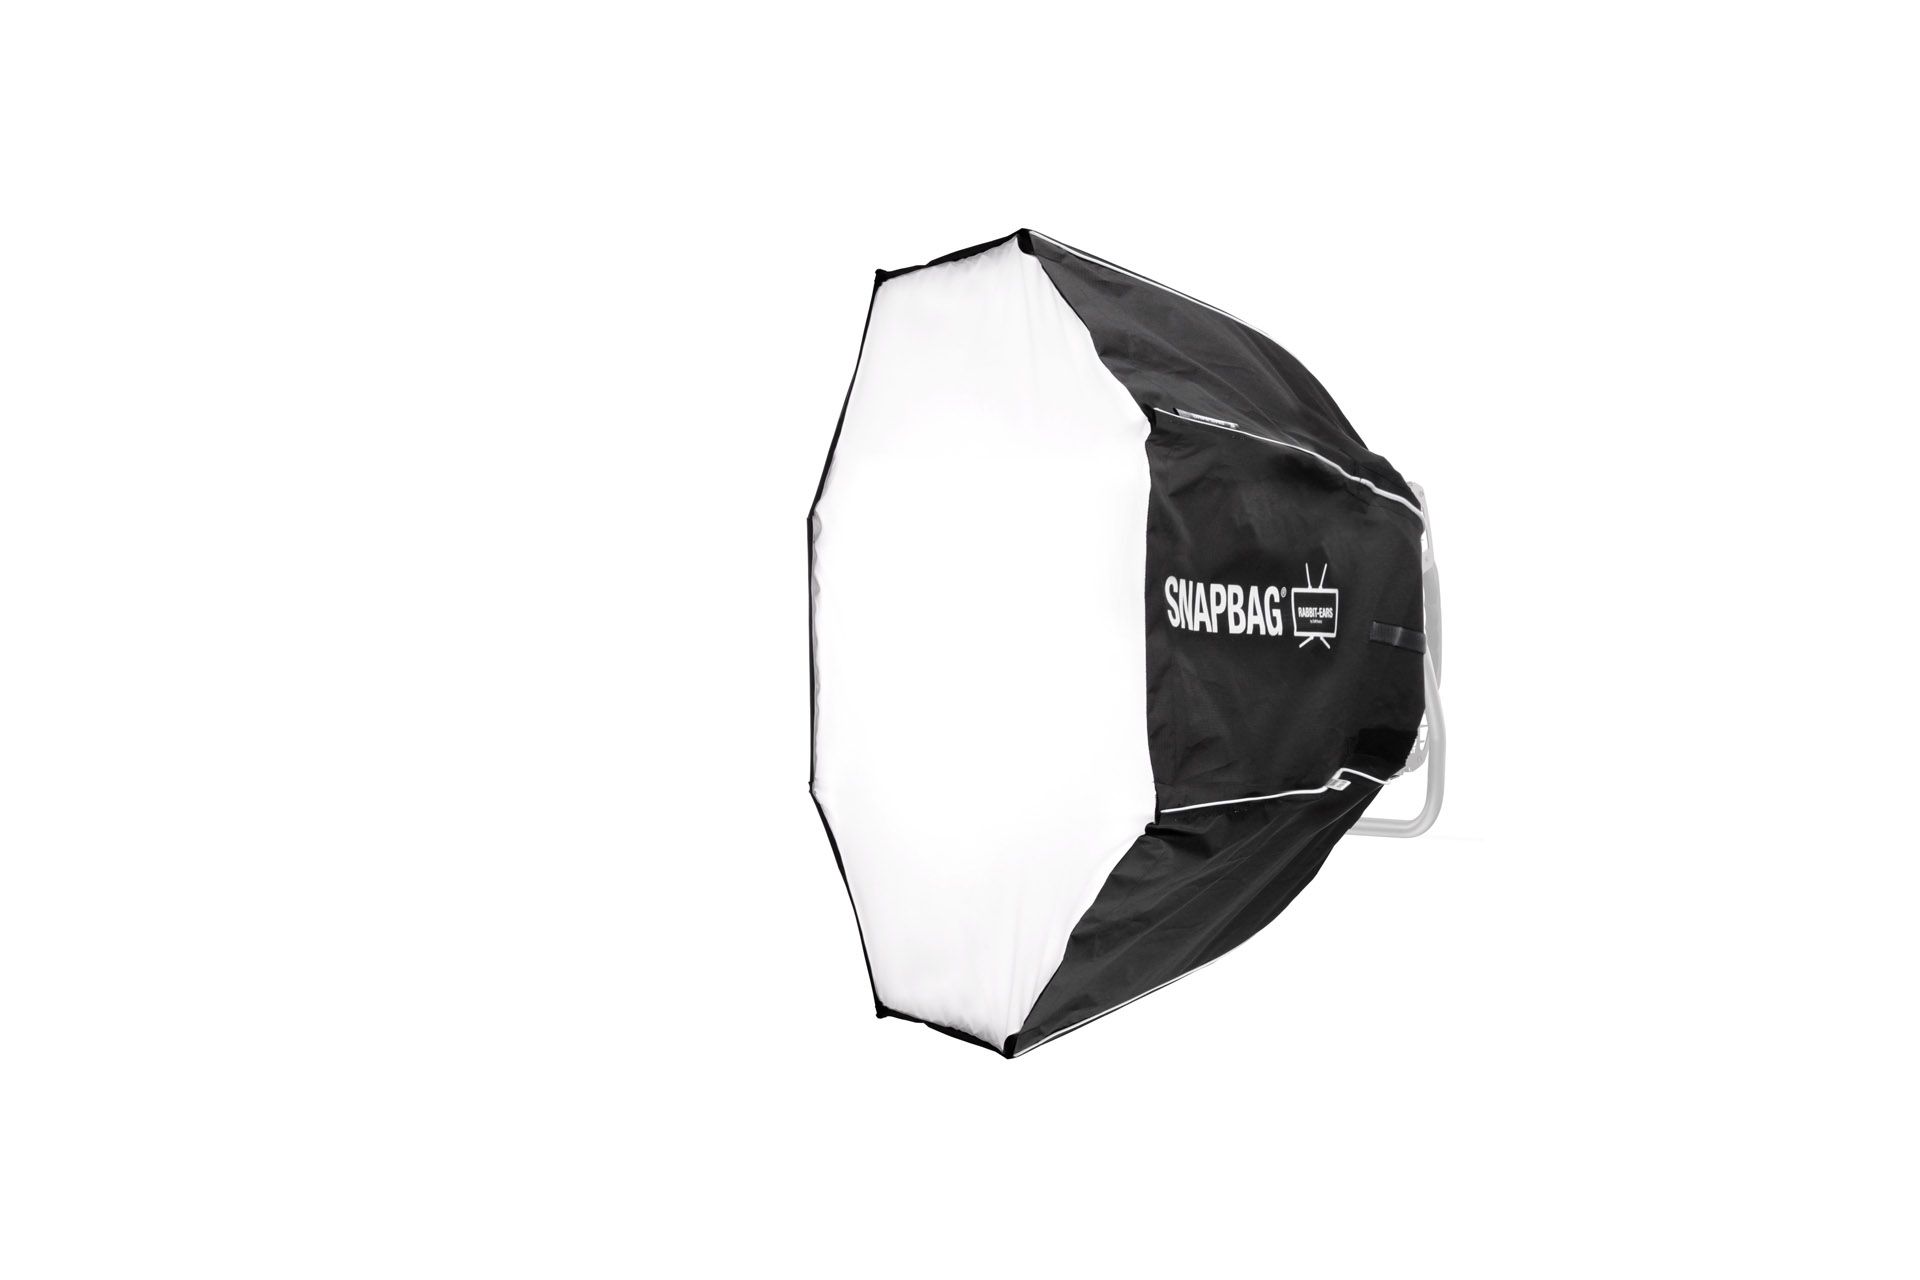 OCT A3 foldable Snapbag 0,9m diameter (requires Rabbit Ears frame mount)